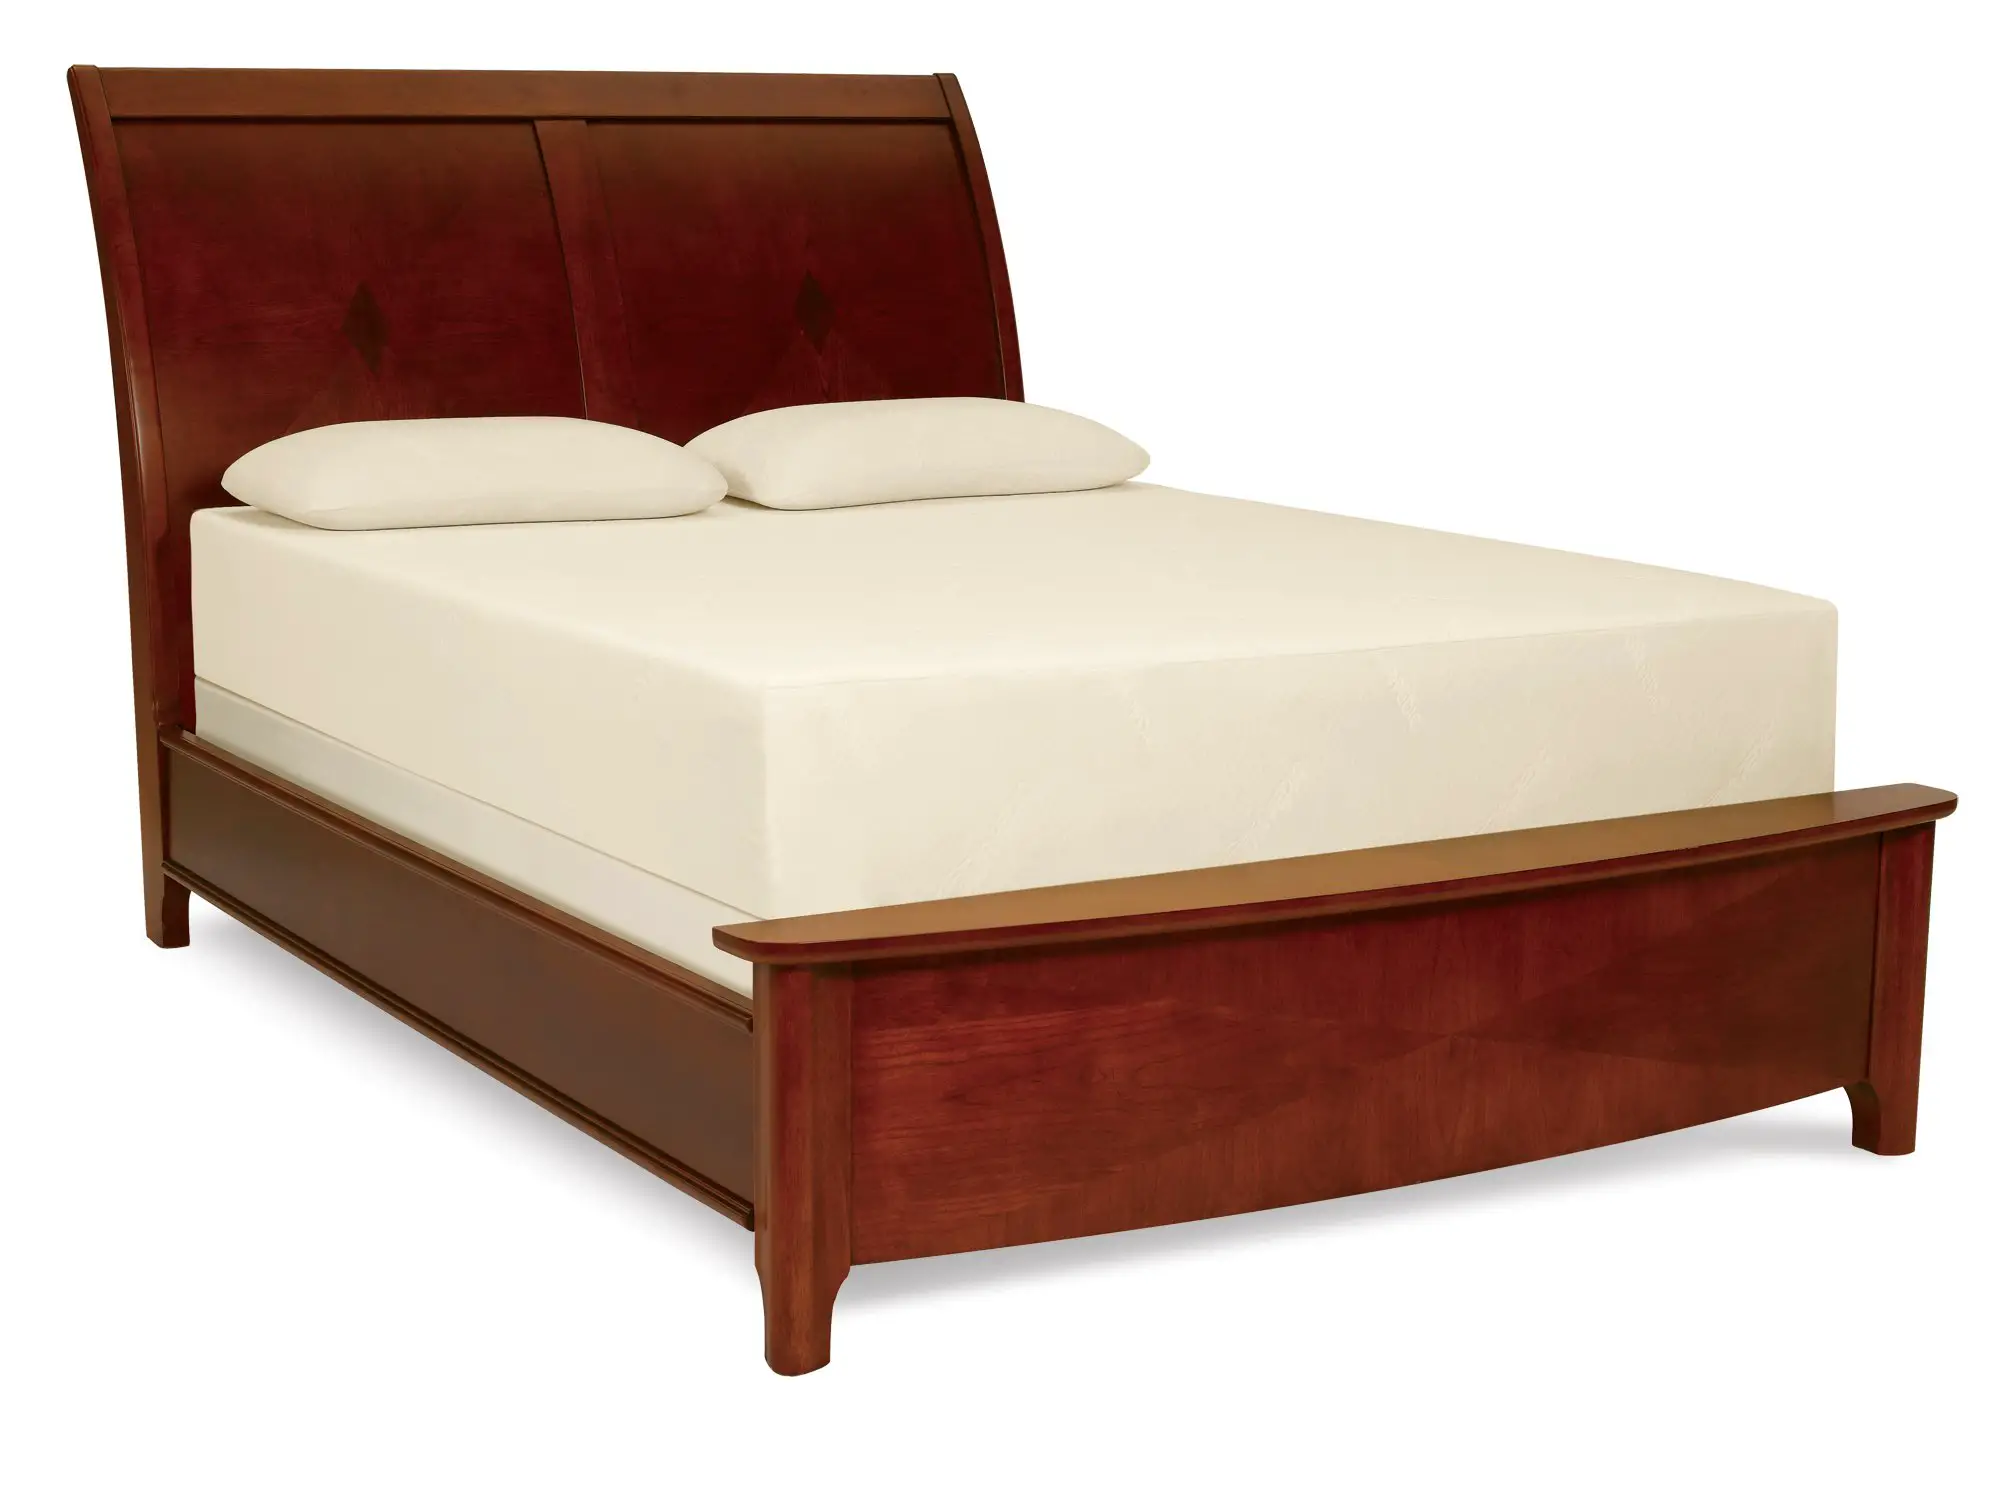 The DeluxeBed by Tempur